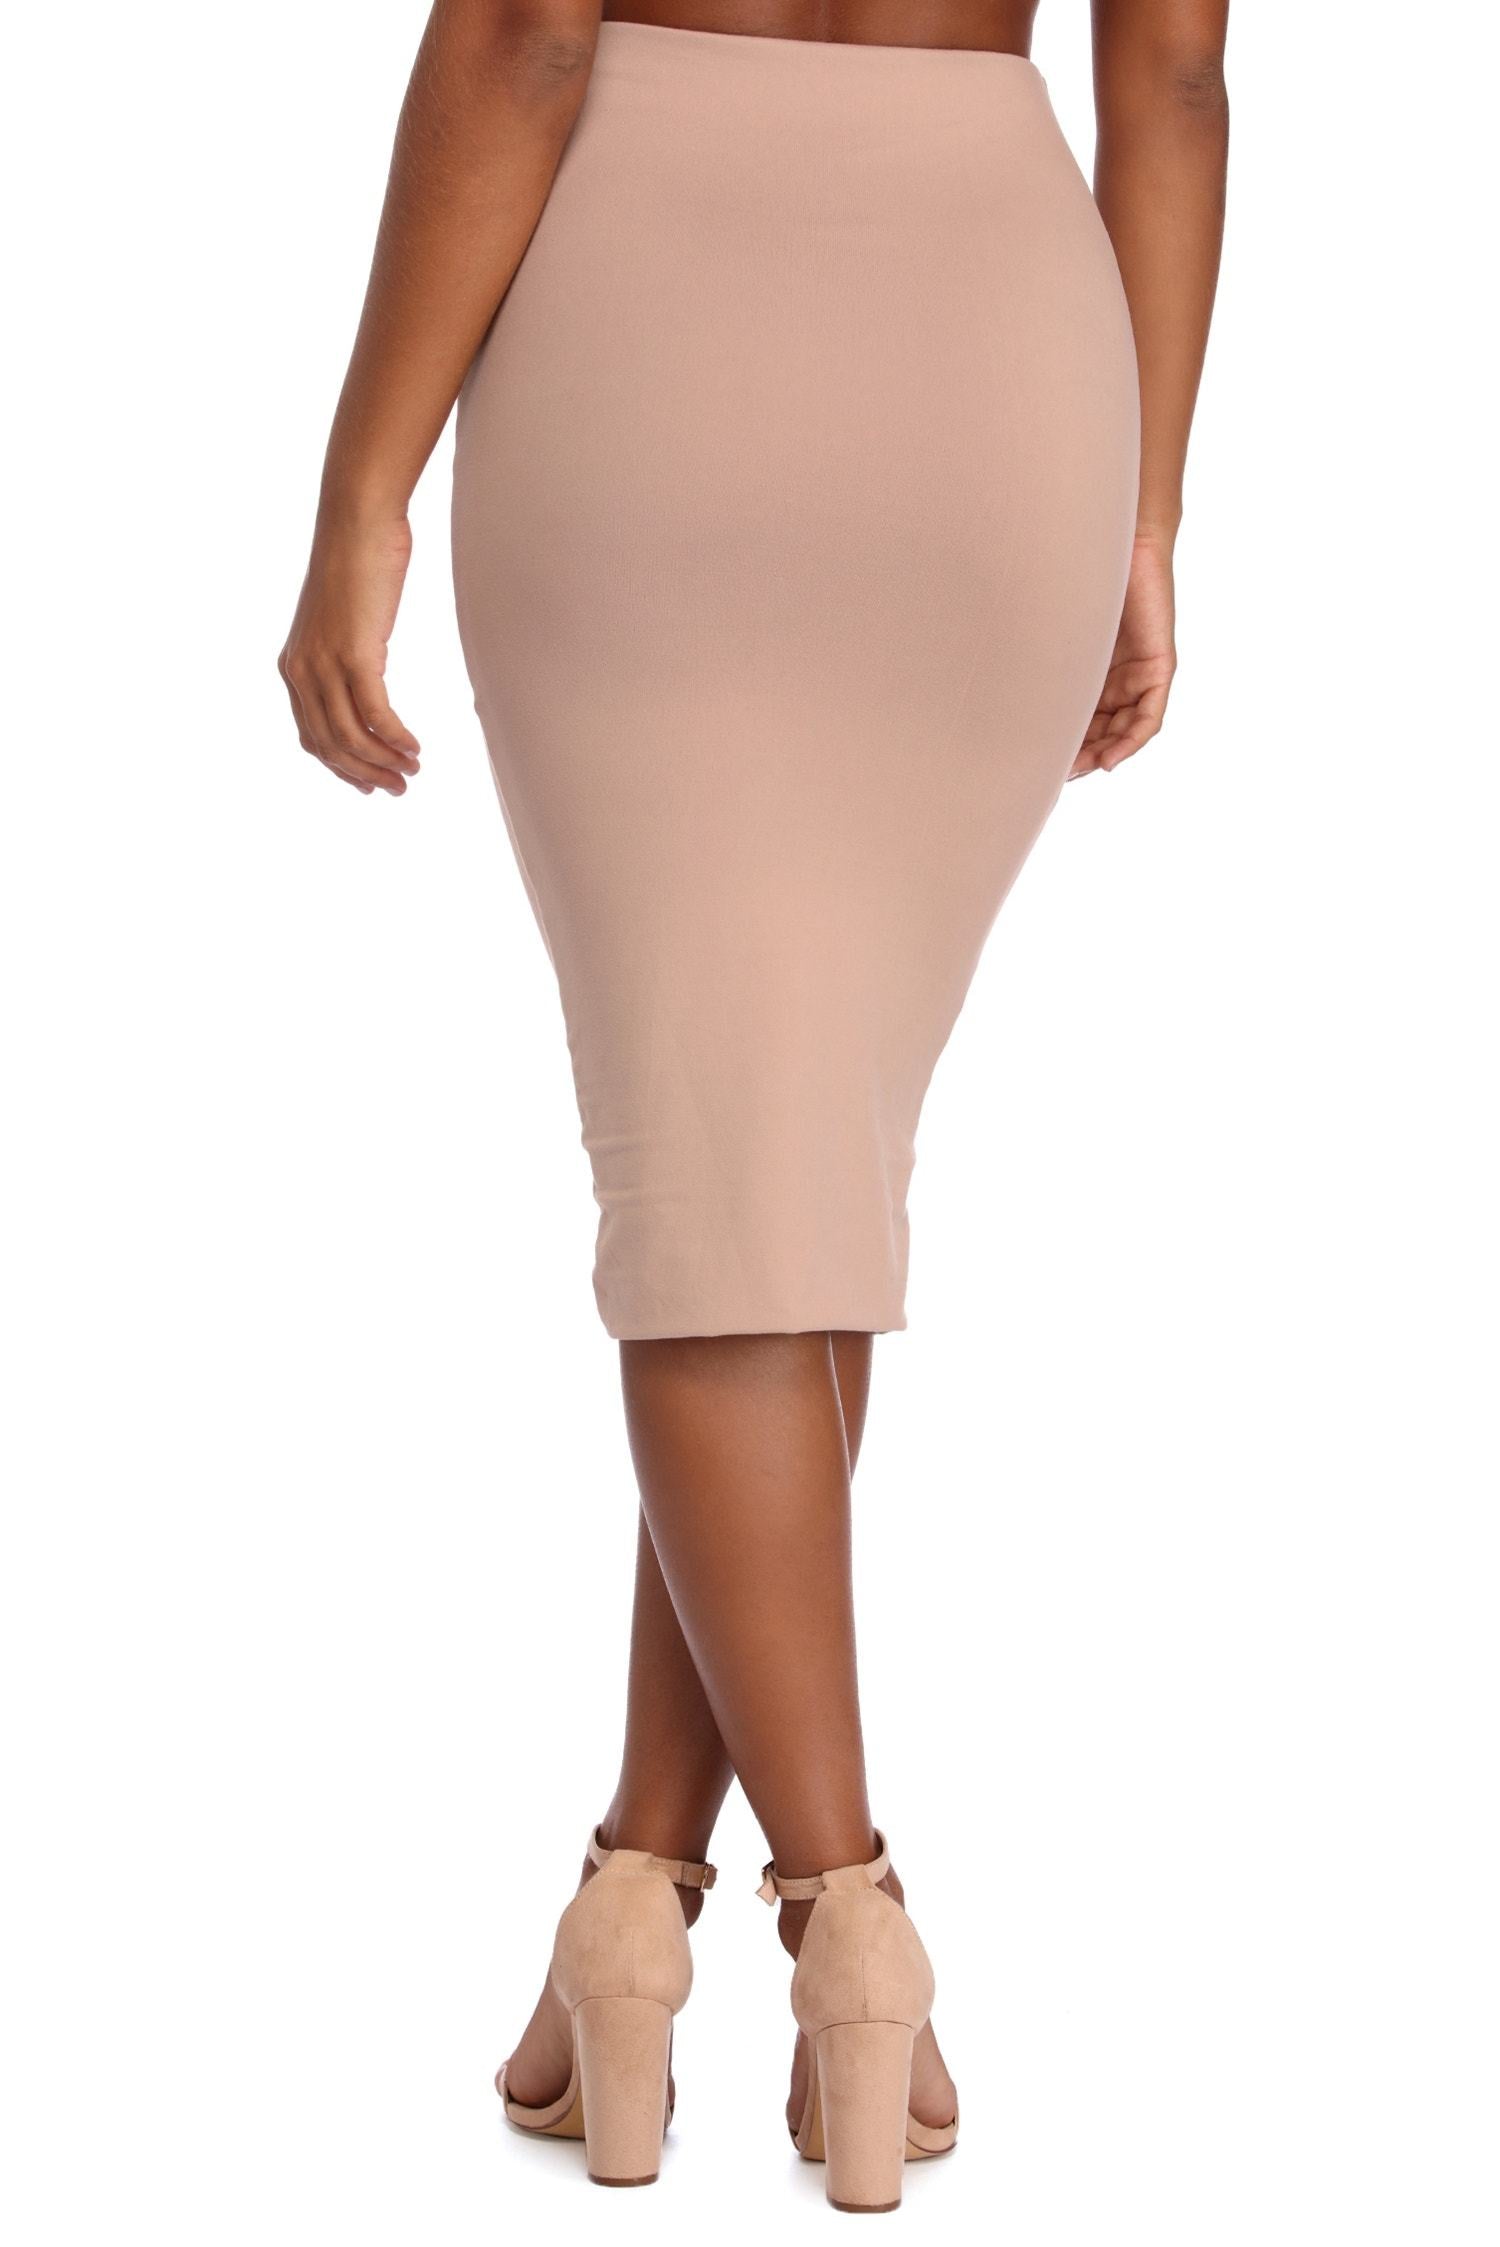 Drop It Like It's Hot Skirt - Lady Occasions